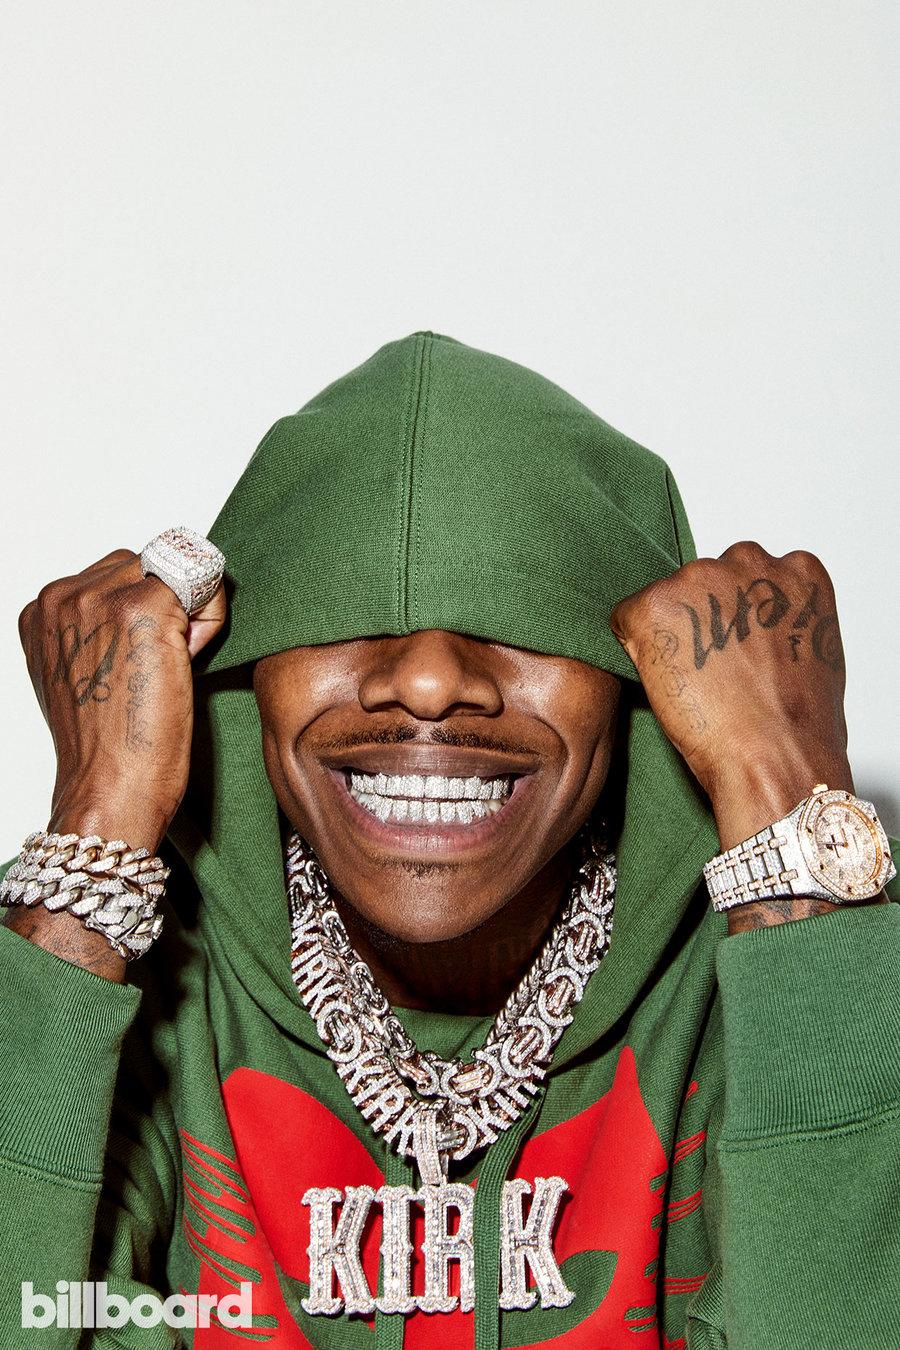 DaBaby: Photo From the Billboard Cover Shoot